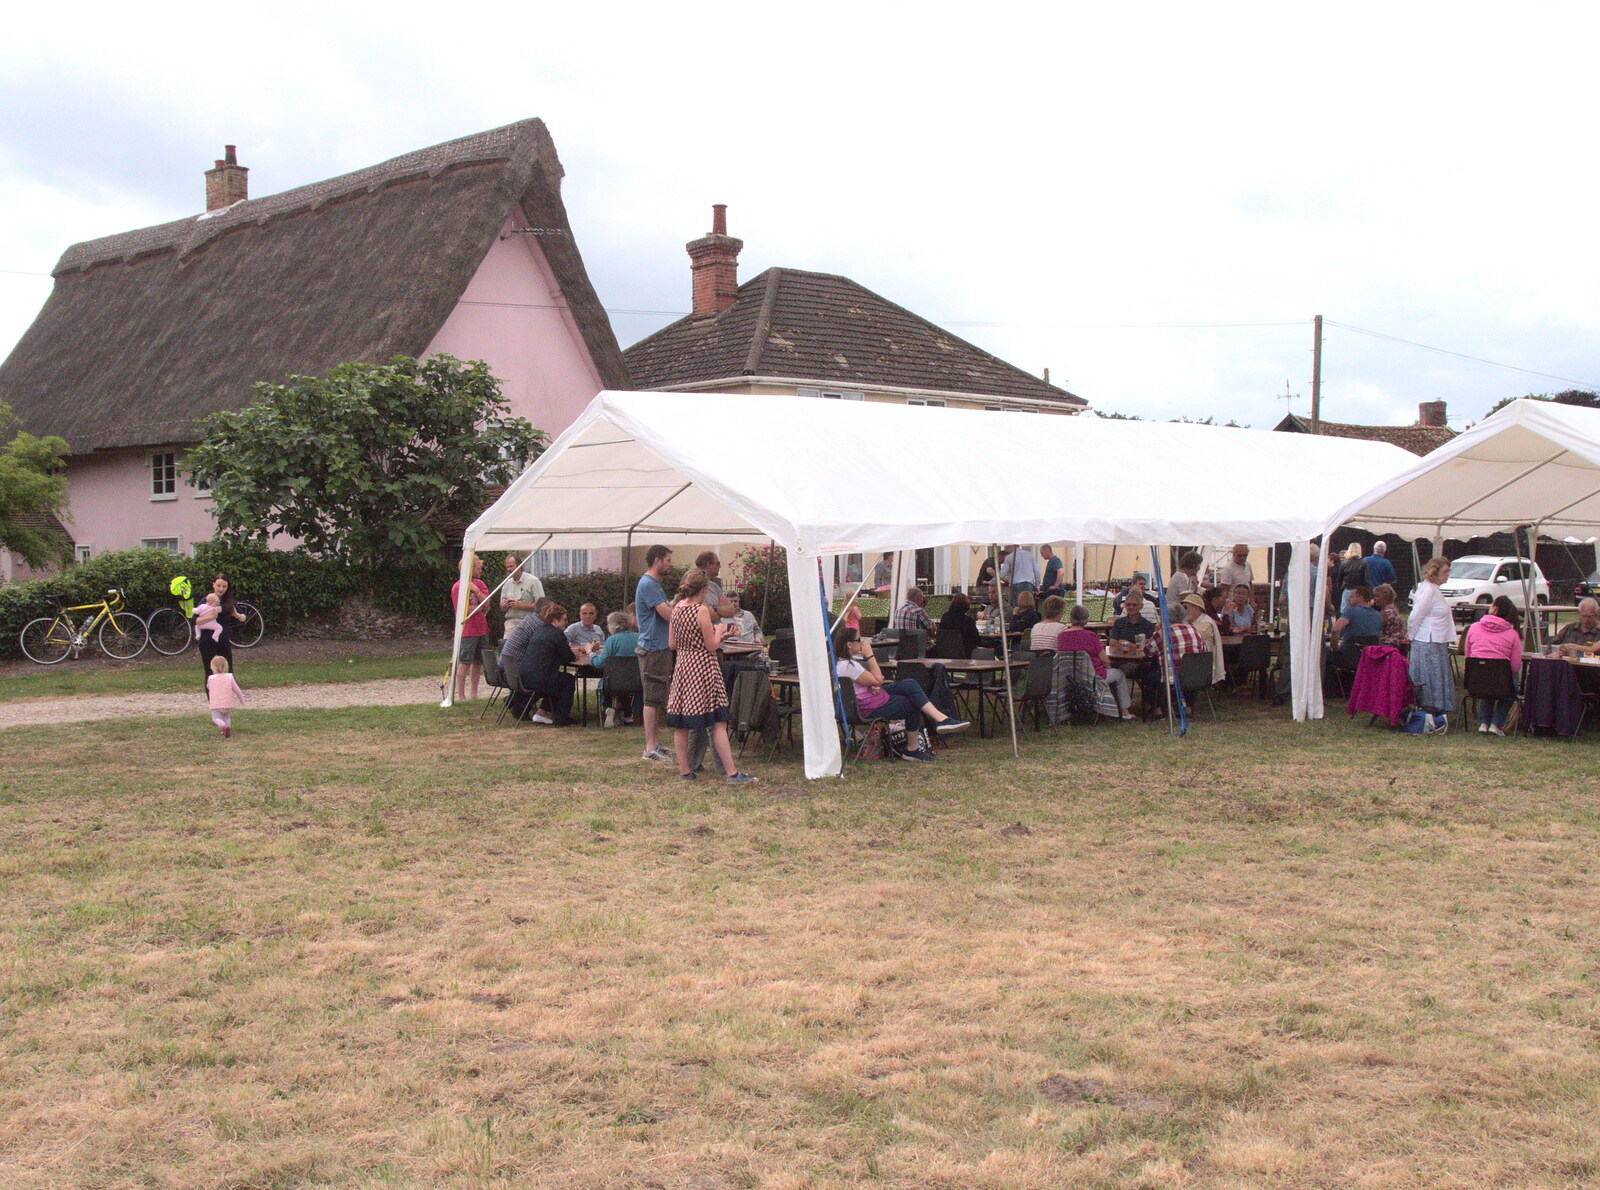 Under the marquee on Little Green from Thrandeston Pig, Little Green, Thrandeston, Suffolk - 25th June 2017